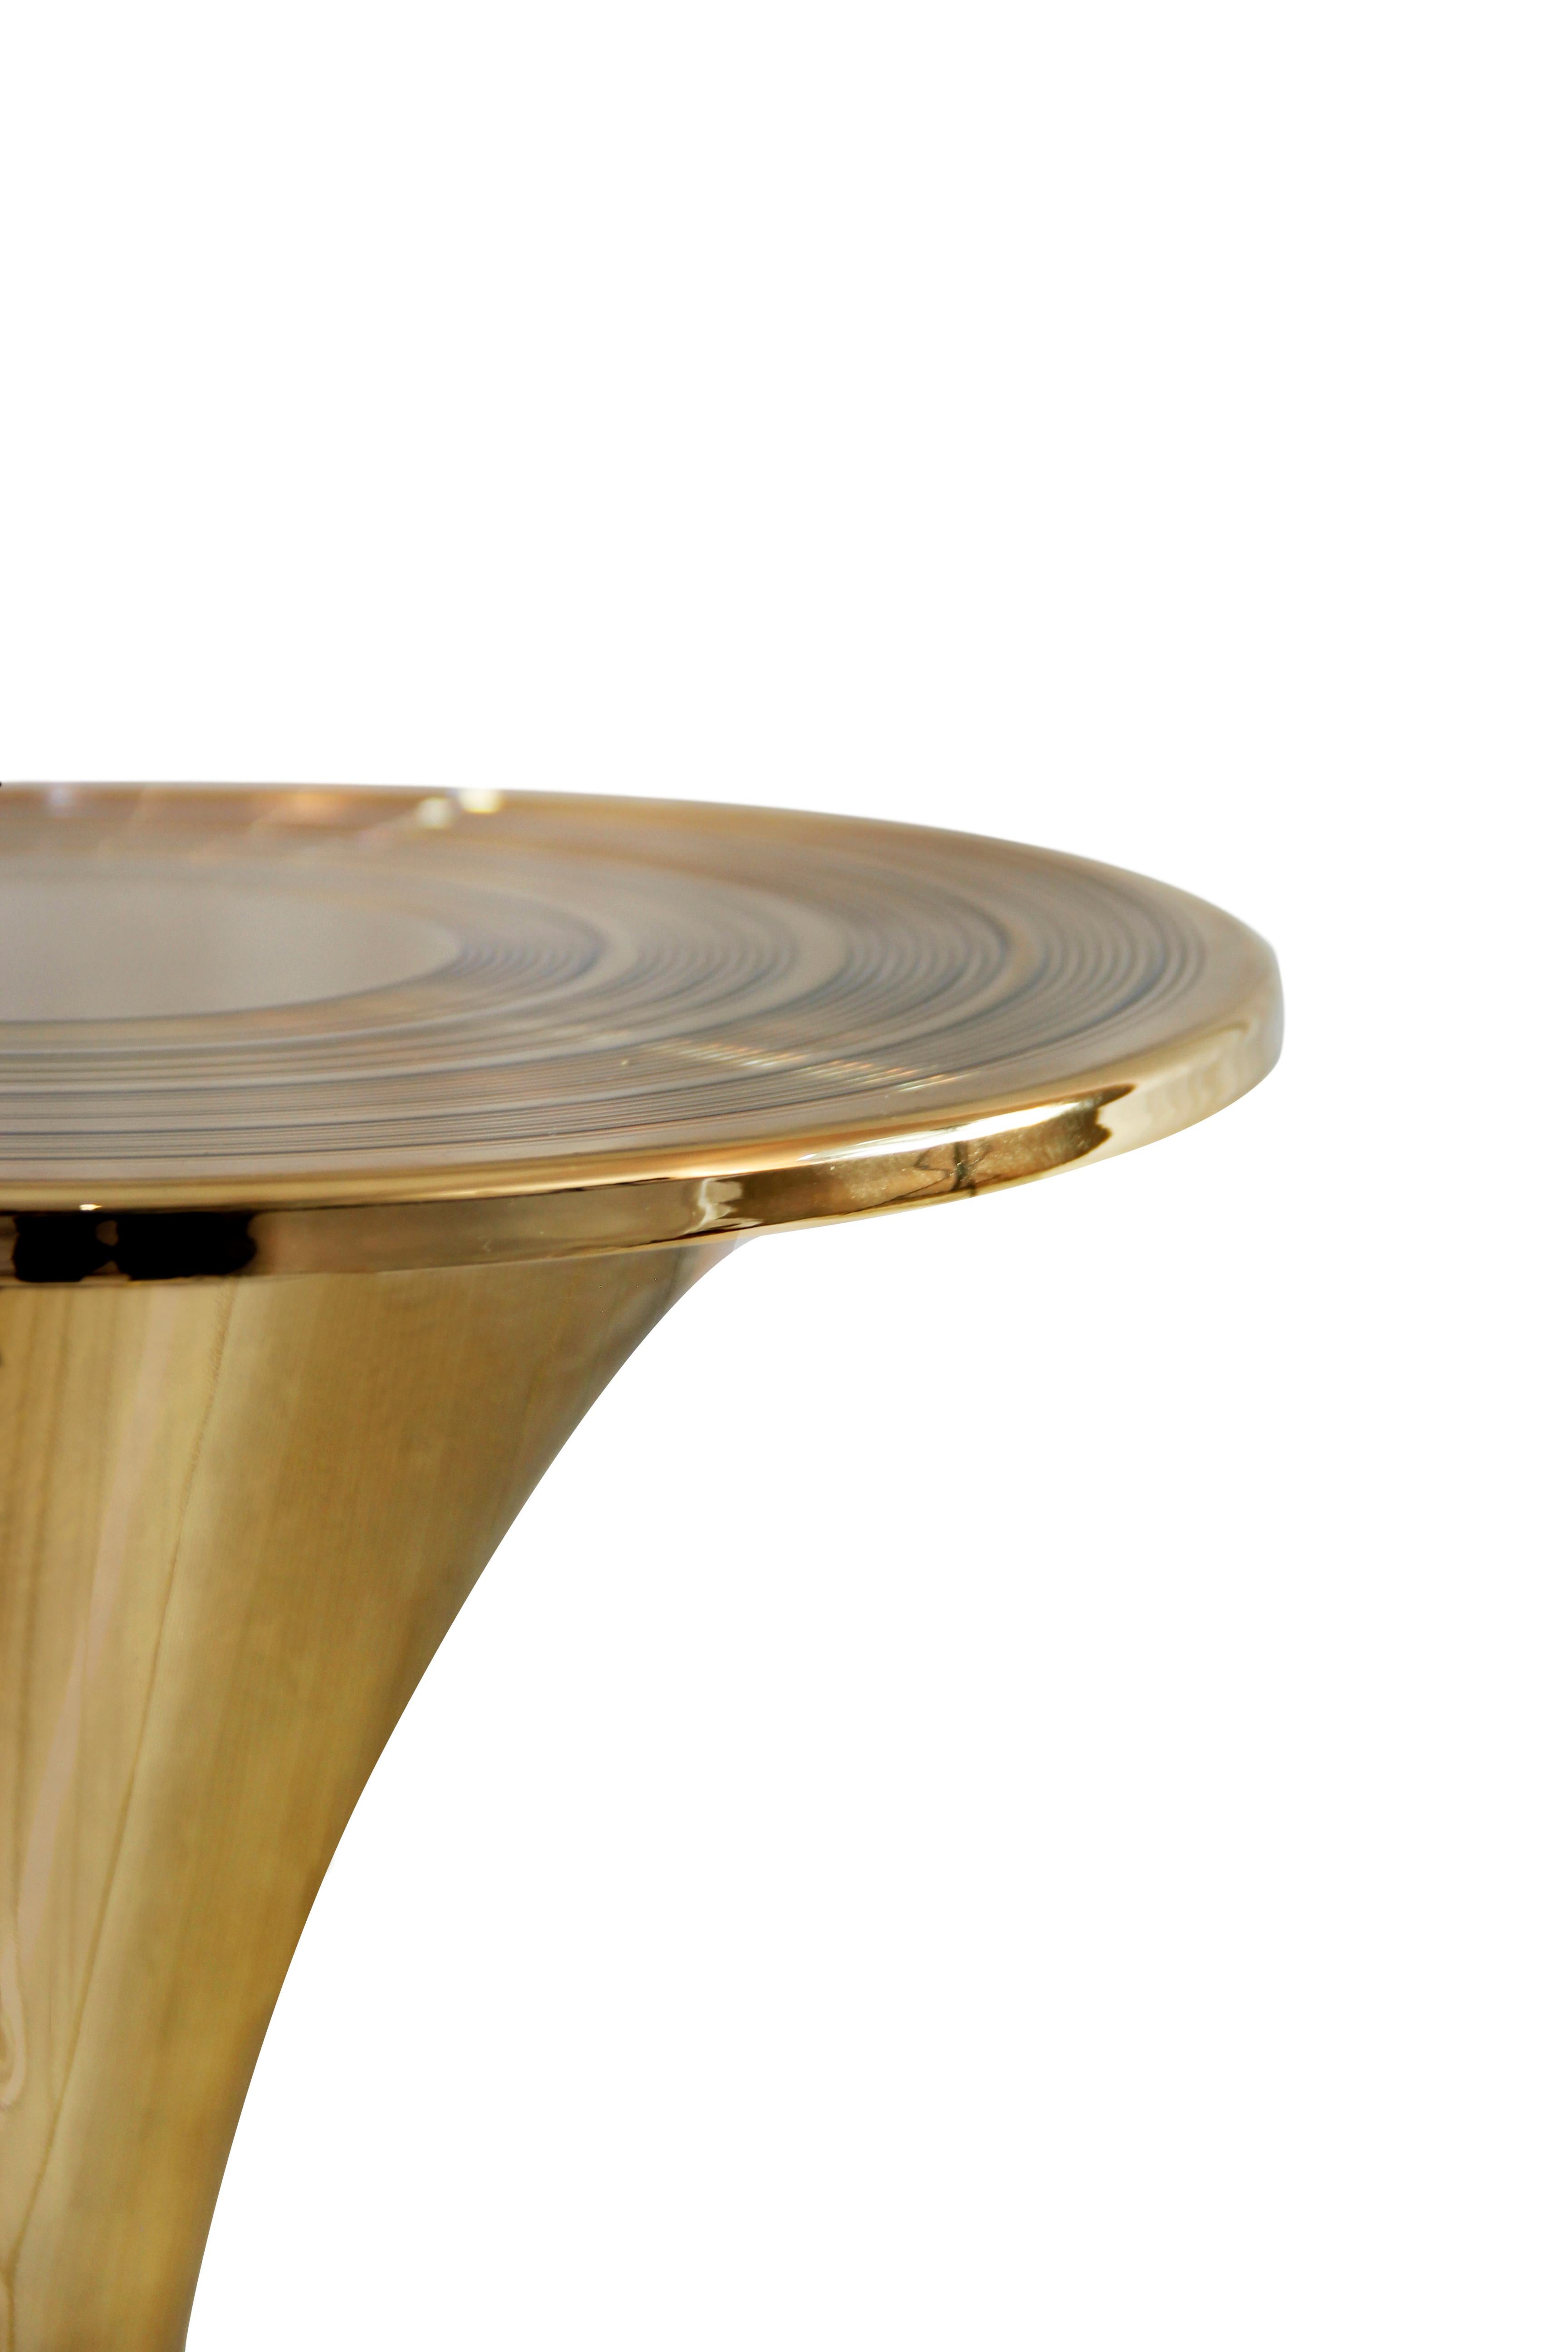 Mid-Century Modern Botti In Gold-Plated Brass Side Table by Essential Home

A Mid-Century Modern Botti in Gold-Plated Brass Side Table by Essential Home, an exquisite round table features a trendy circular pattern that resembles the growth ring of